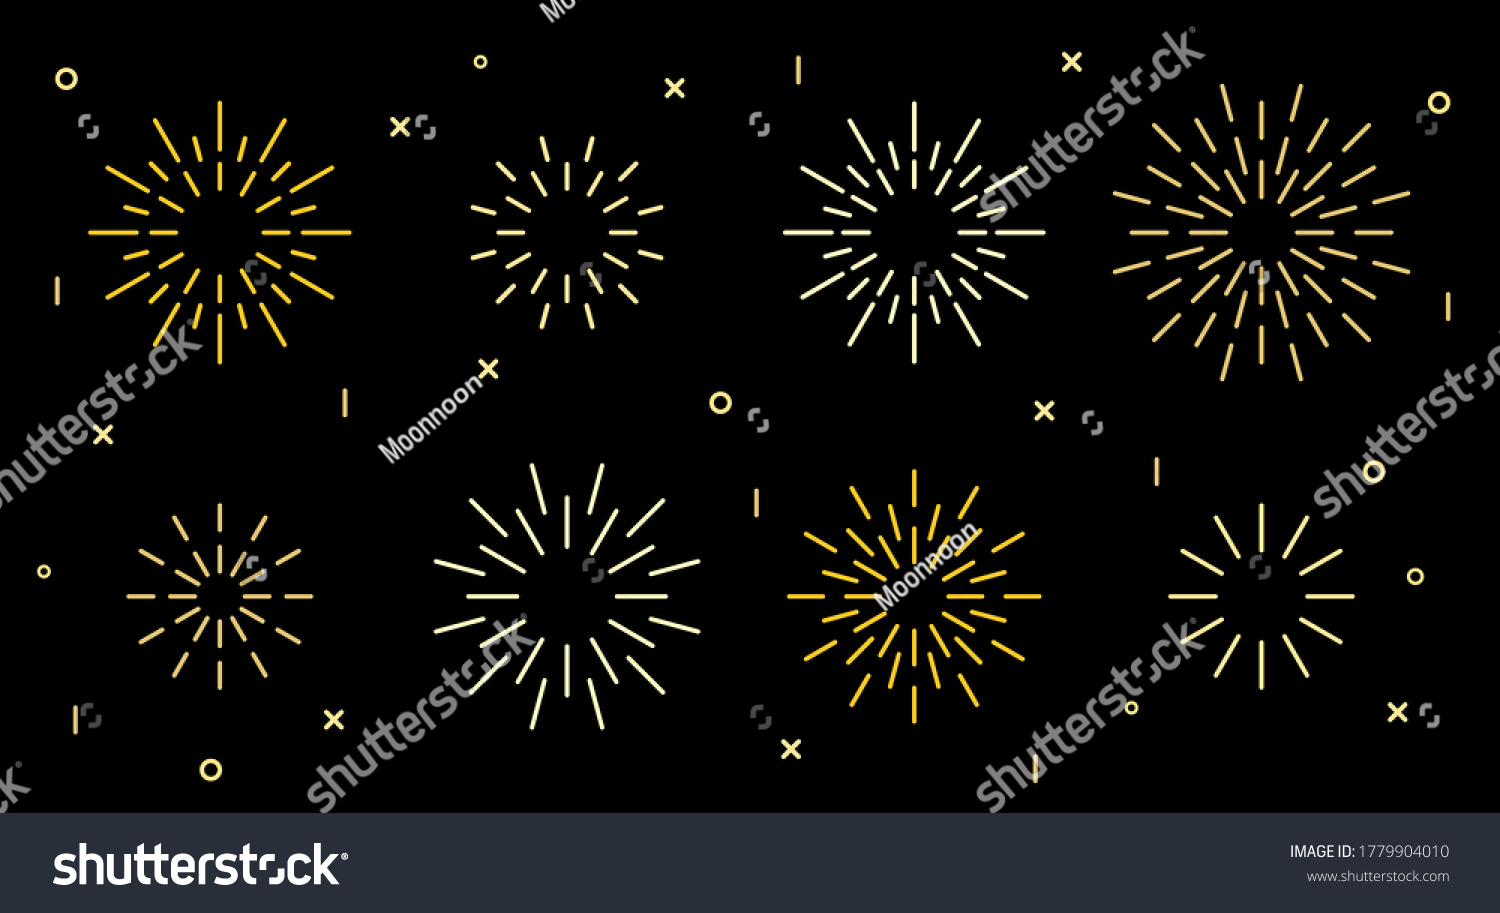 Sparkle star shape art deco fireworks burst pattern collection. Gold star shaped firecracker pattern collection isolated on black background with rays and trails. Carnival celebration fireworks burst #1779904010